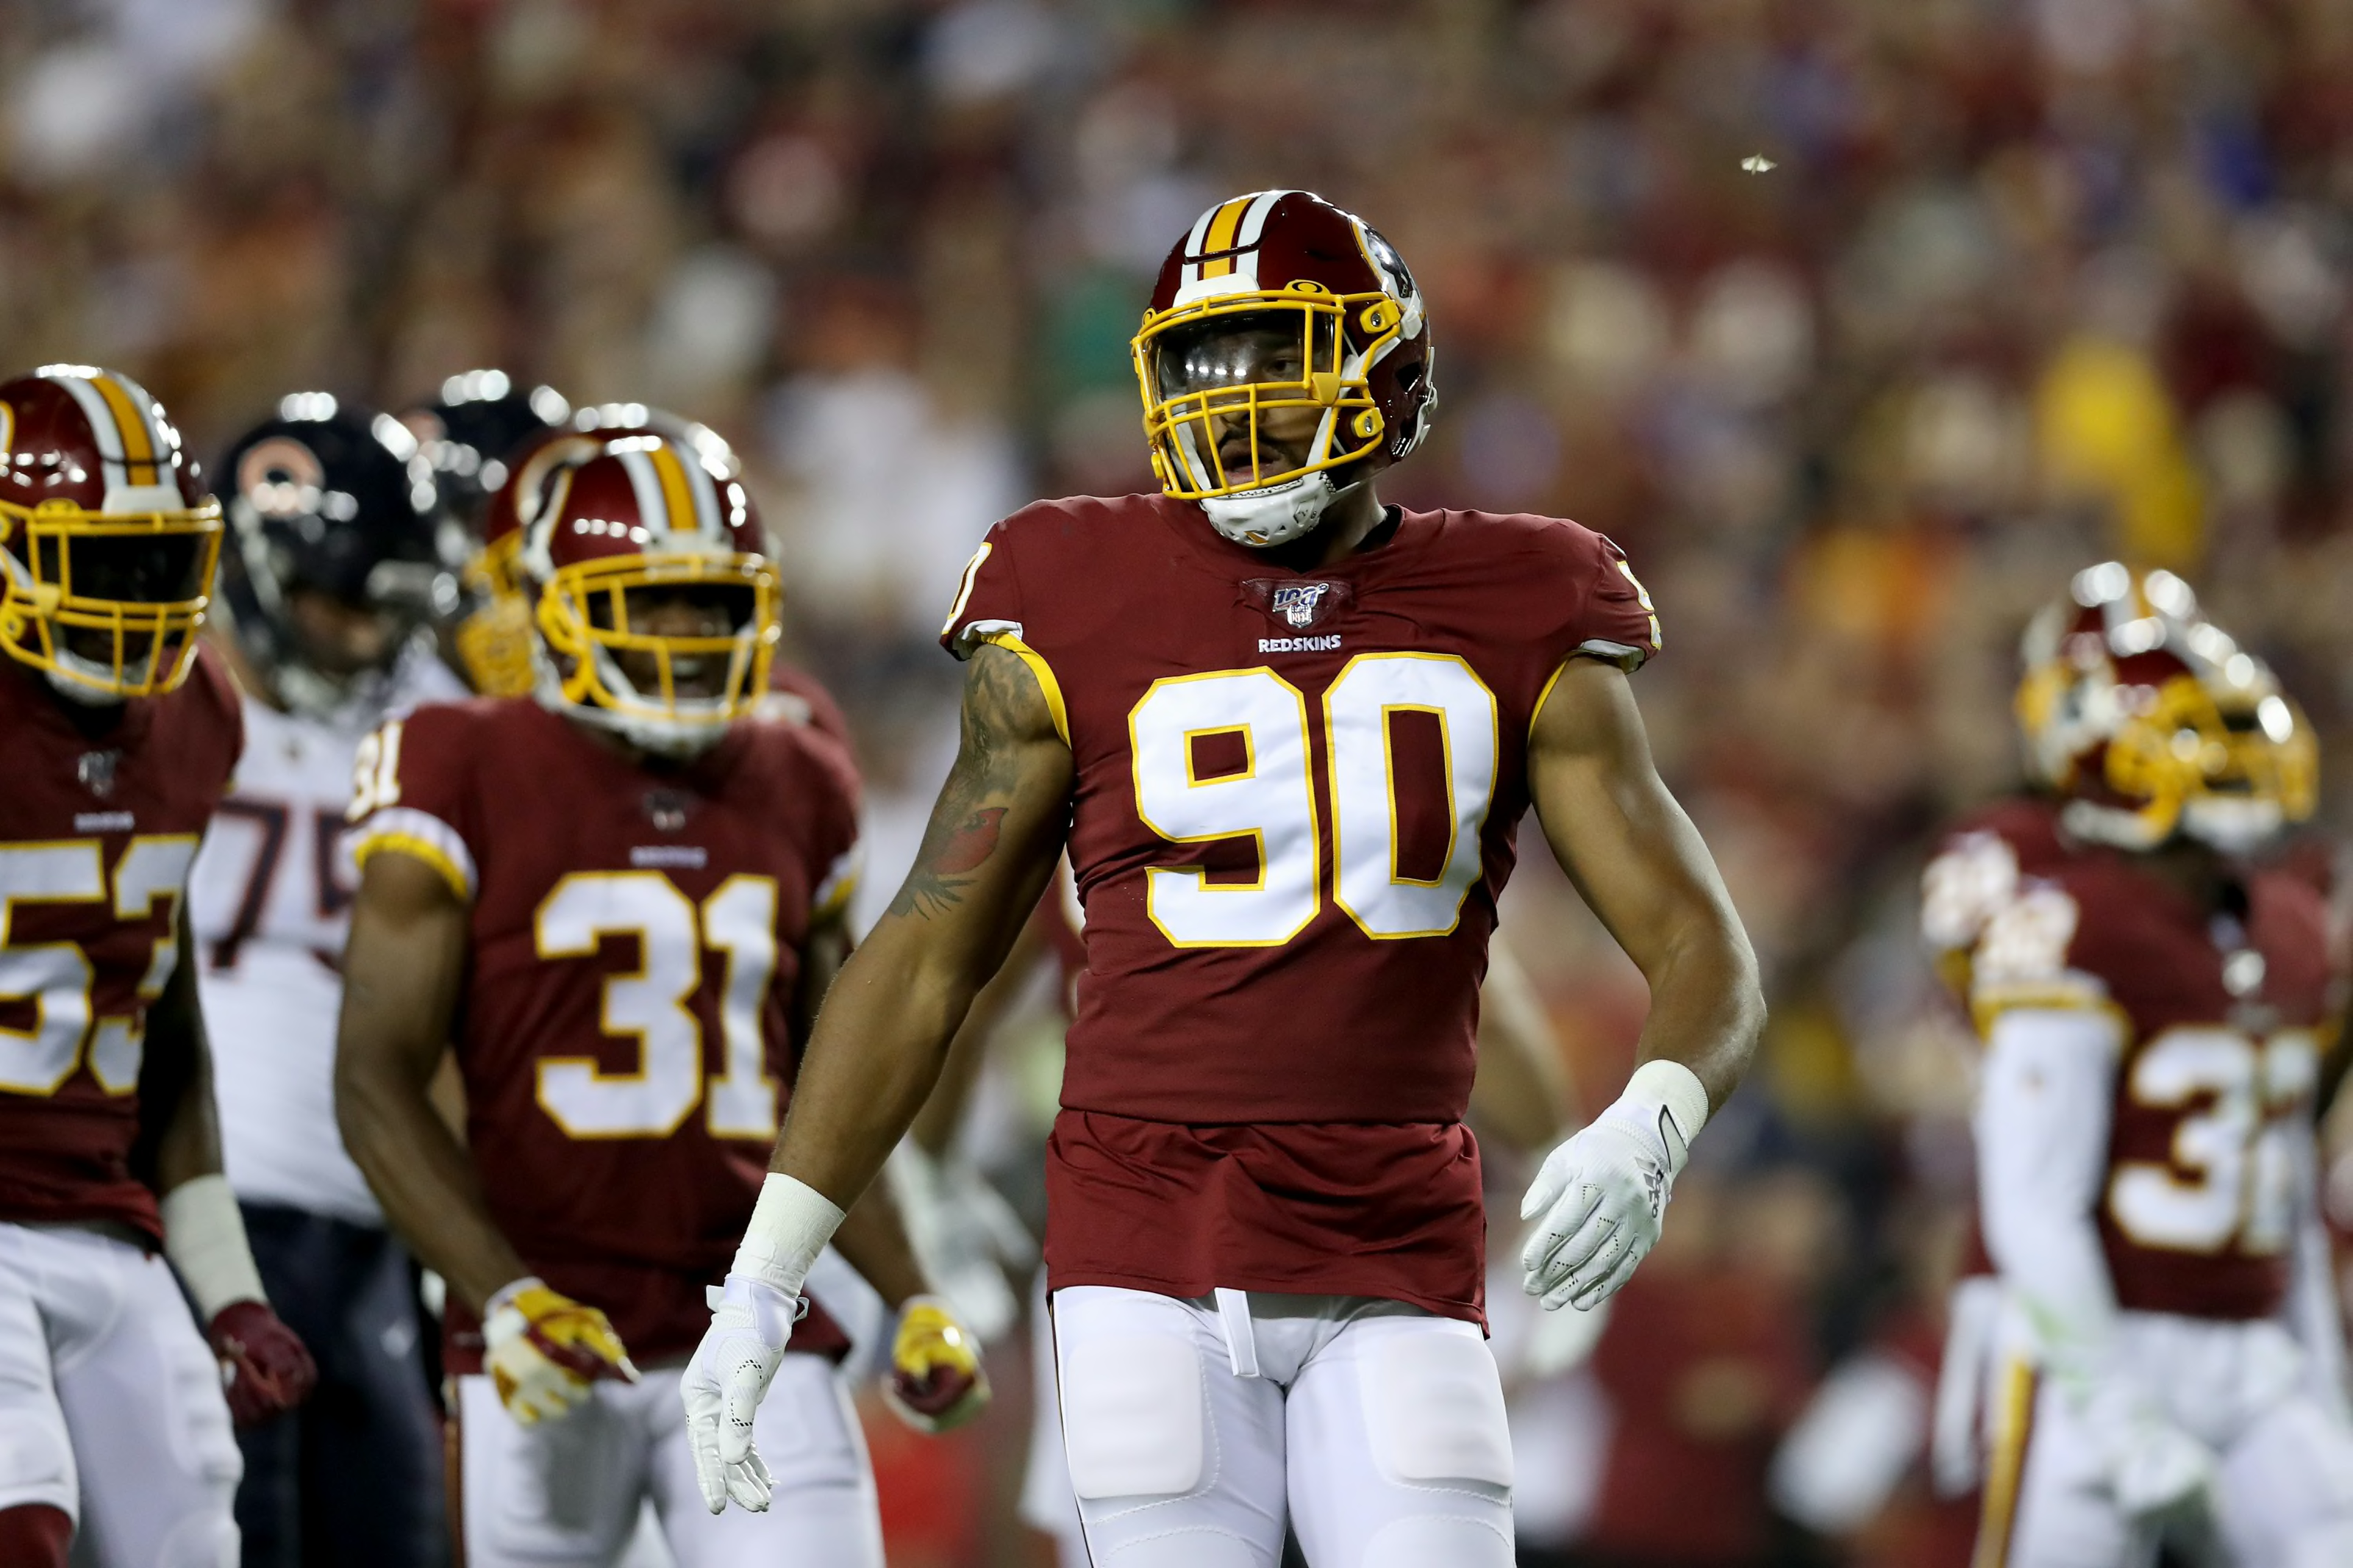 Redskins need a uniform change in 2020